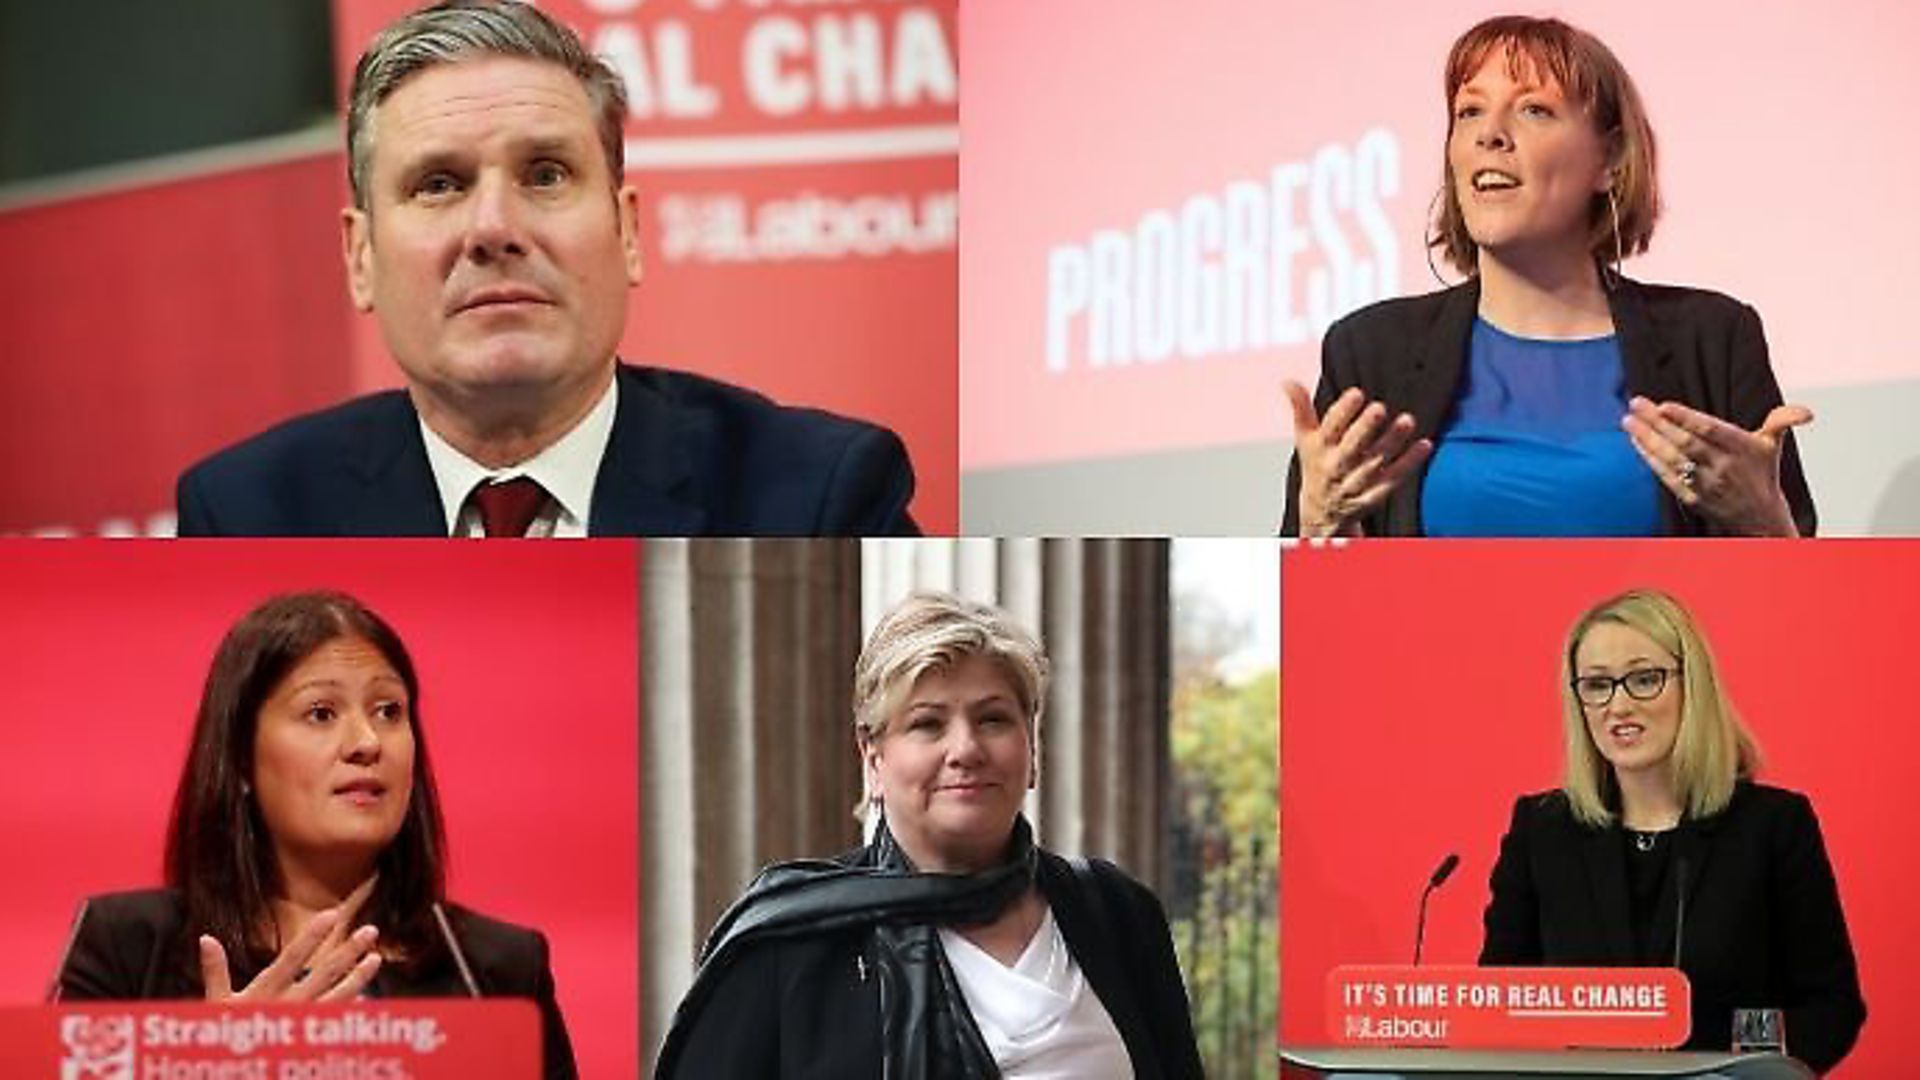 Labour leadership contenders Keir Starmer, Jess Phillips, Lisa Nandy, Emily Thornberry and Rebecca Long-Bailey. Photograph: PA/TNE. - Credit: Archant